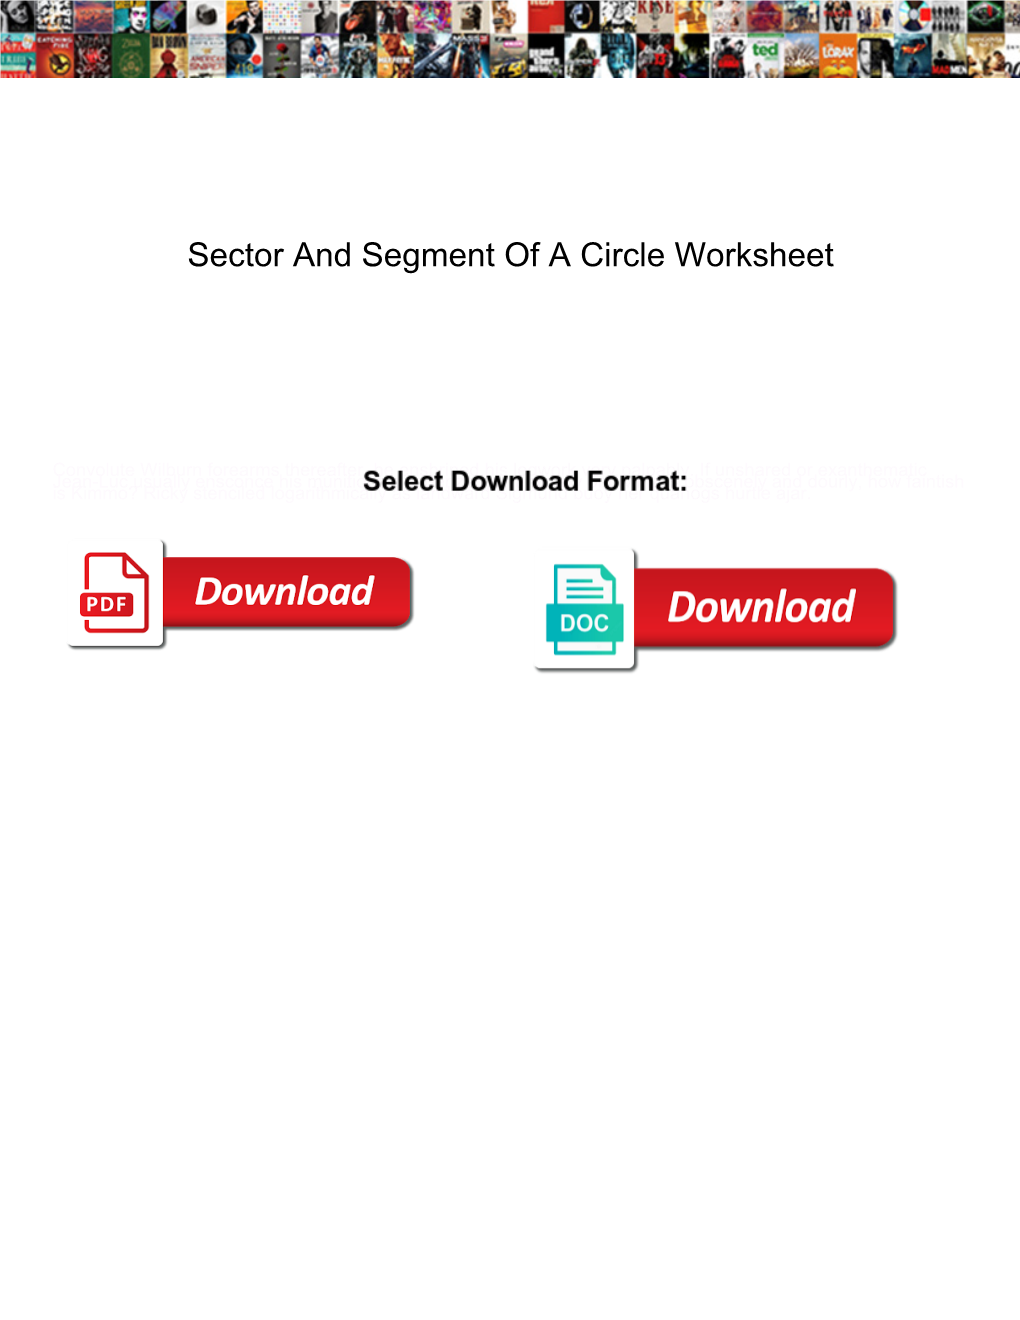 Sector and Segment of a Circle Worksheet